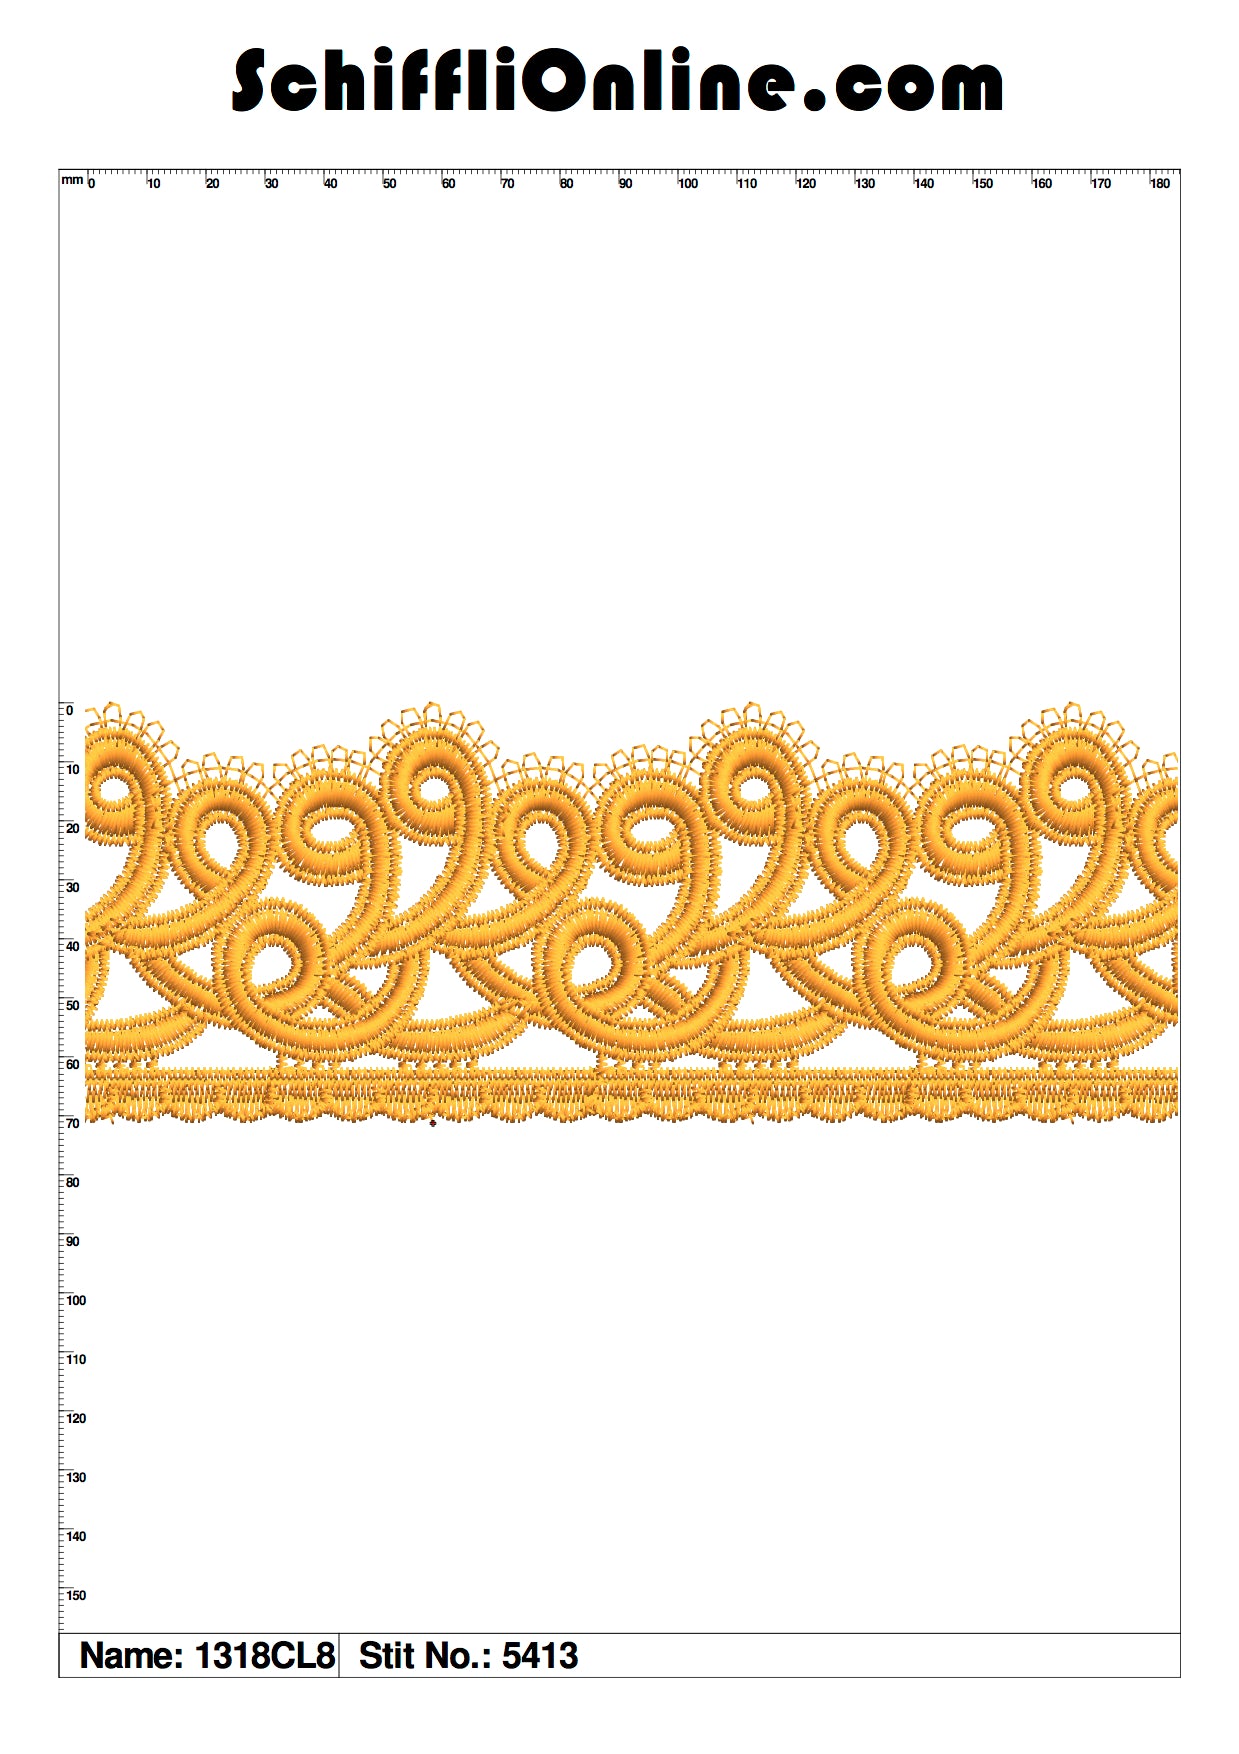 Book 143 CHEMICAL LACE 8X4 50 DESIGNS